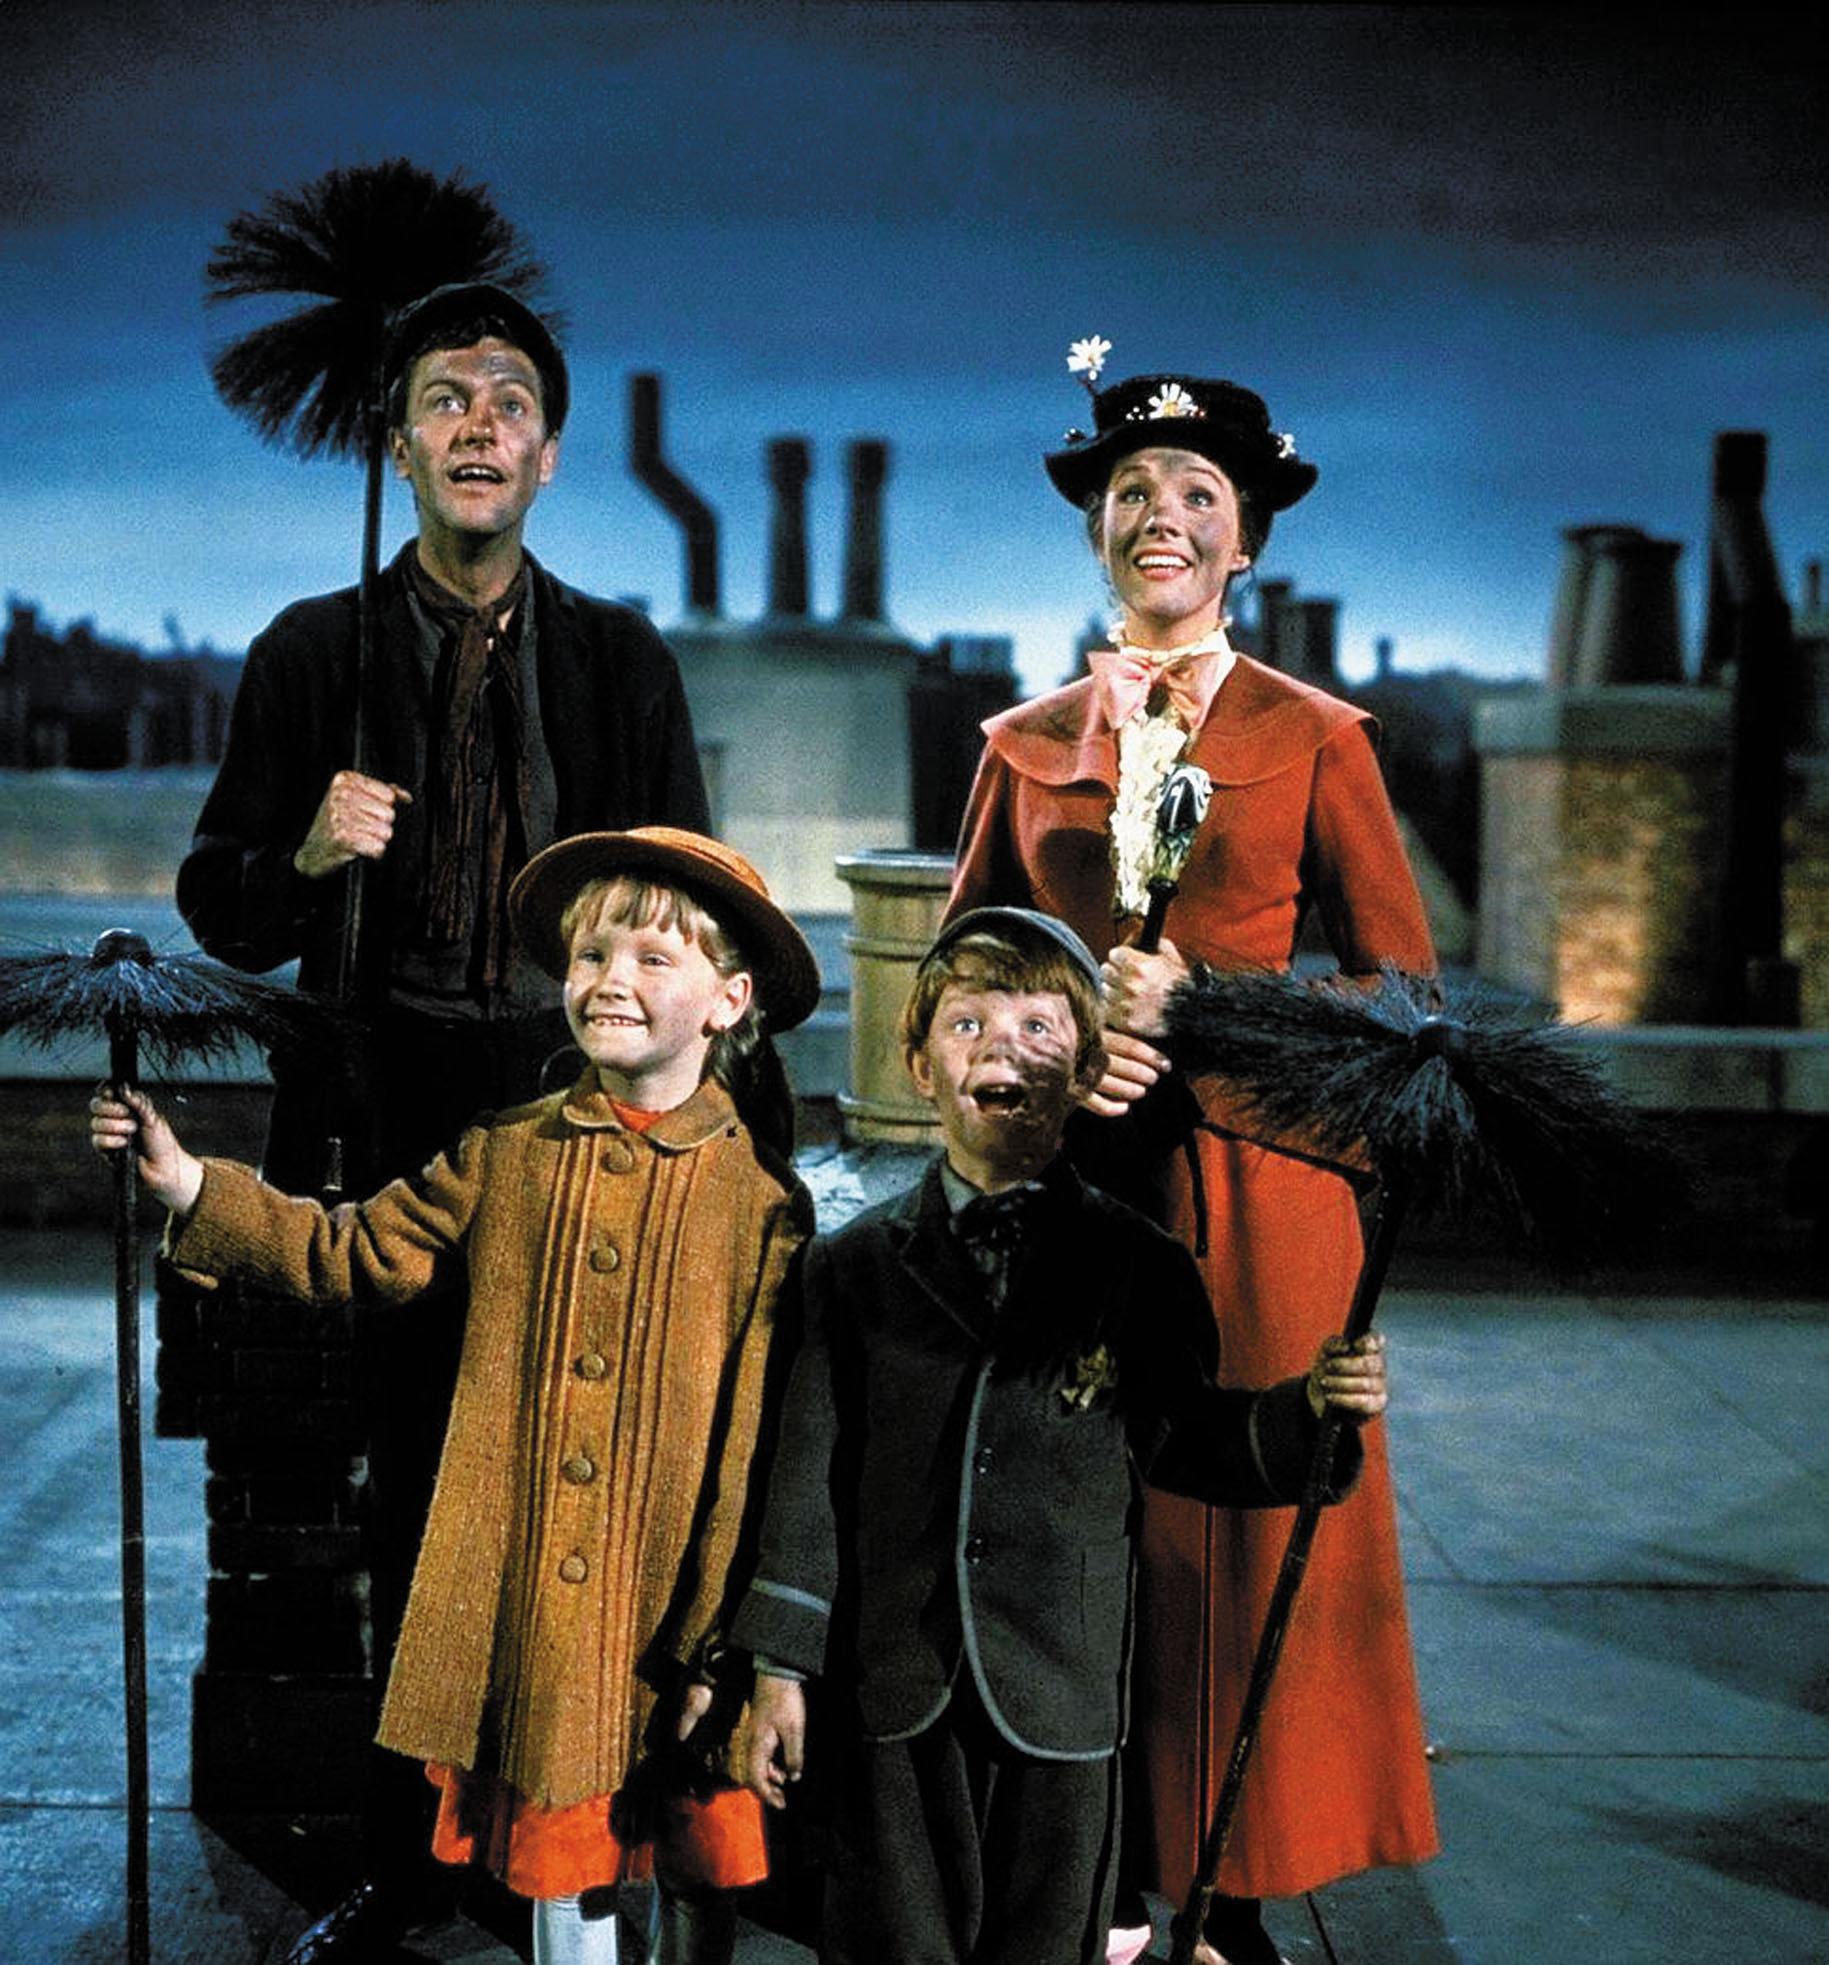 Bert, a chimney sweep, Jane, a young blonde child in a red dress and yellow overcoat, Michael, a young strawberry blonde child in short pants and a button coat, and Mary Poppins, a nanny in a red dress with a black hat with white flowers, stand on a rooftop, covered in soot.